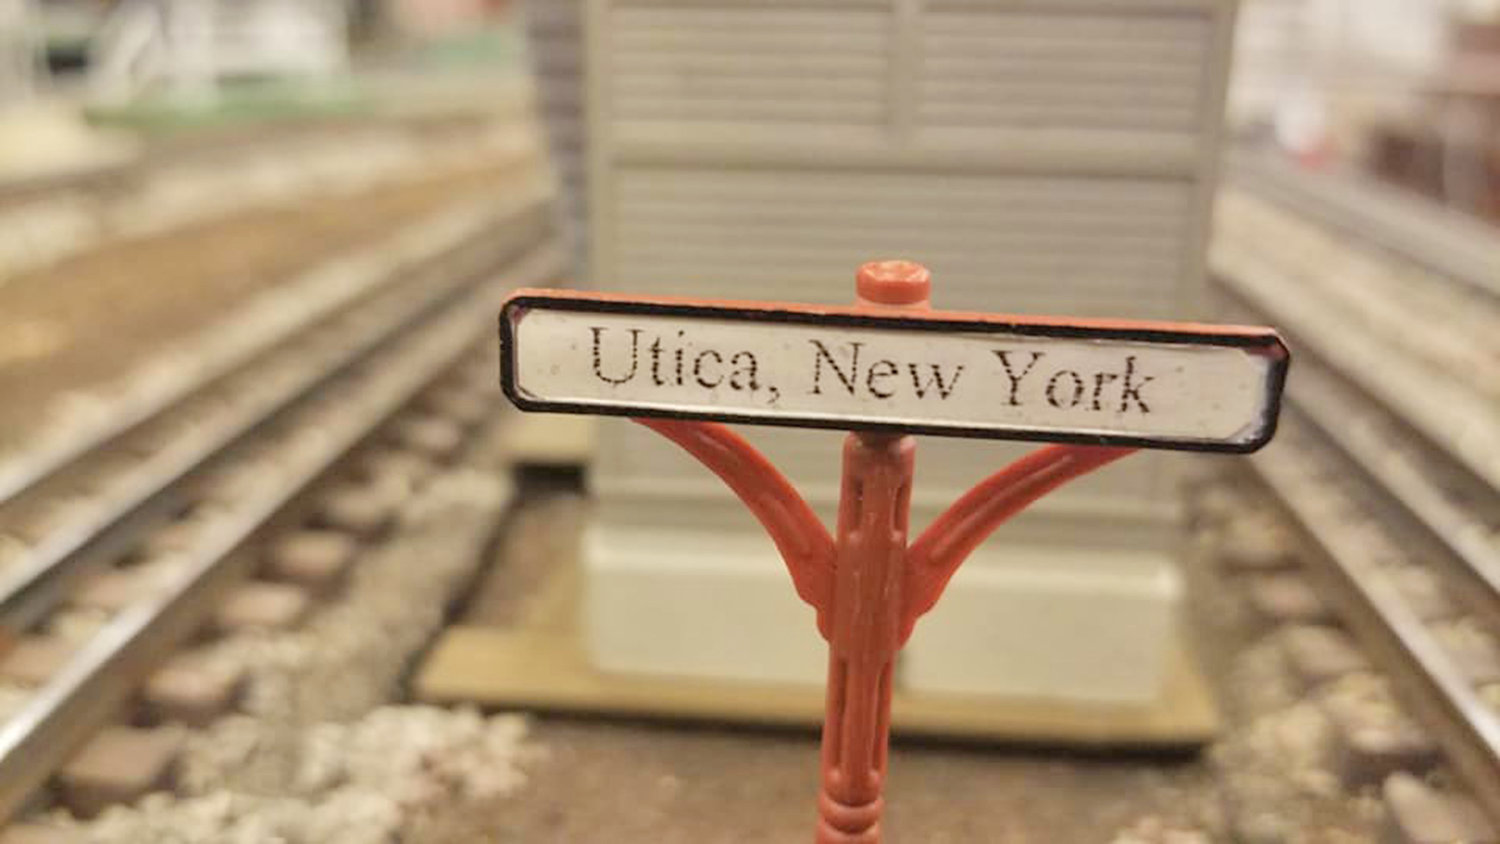 The last stop is the Toy Train Collectors Society Ltd’s annual Toy Train Show Jan. 15 at Union Station in Utica.